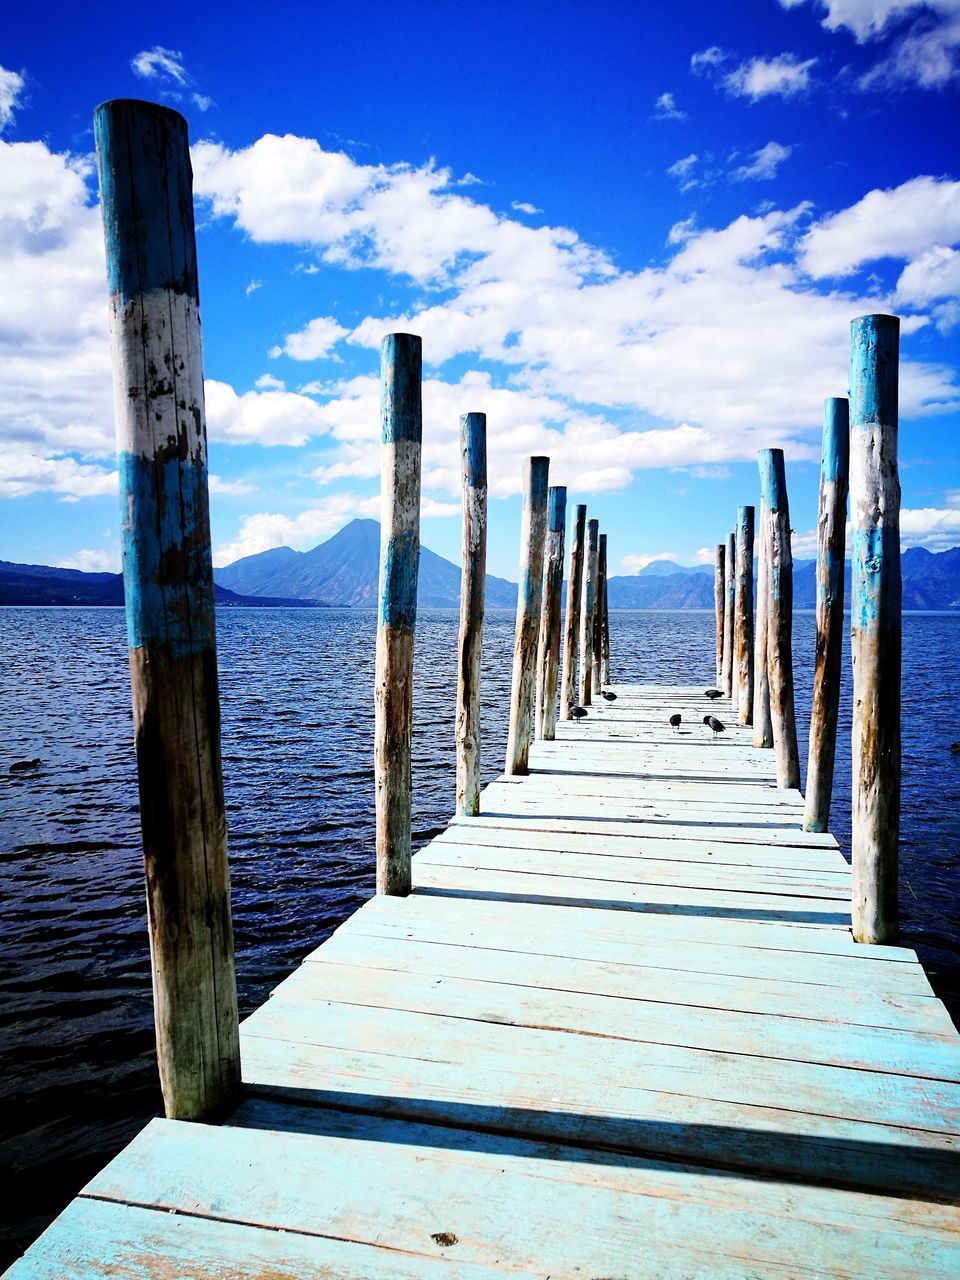 sea, wood - material, water, pier, sky, cloud - sky, nature, tranquility, horizon over water, day, outdoors, no people, jetty, wood paneling, beach, scenics, sunlight, tranquil scene, beauty in nature, blue, wooden post